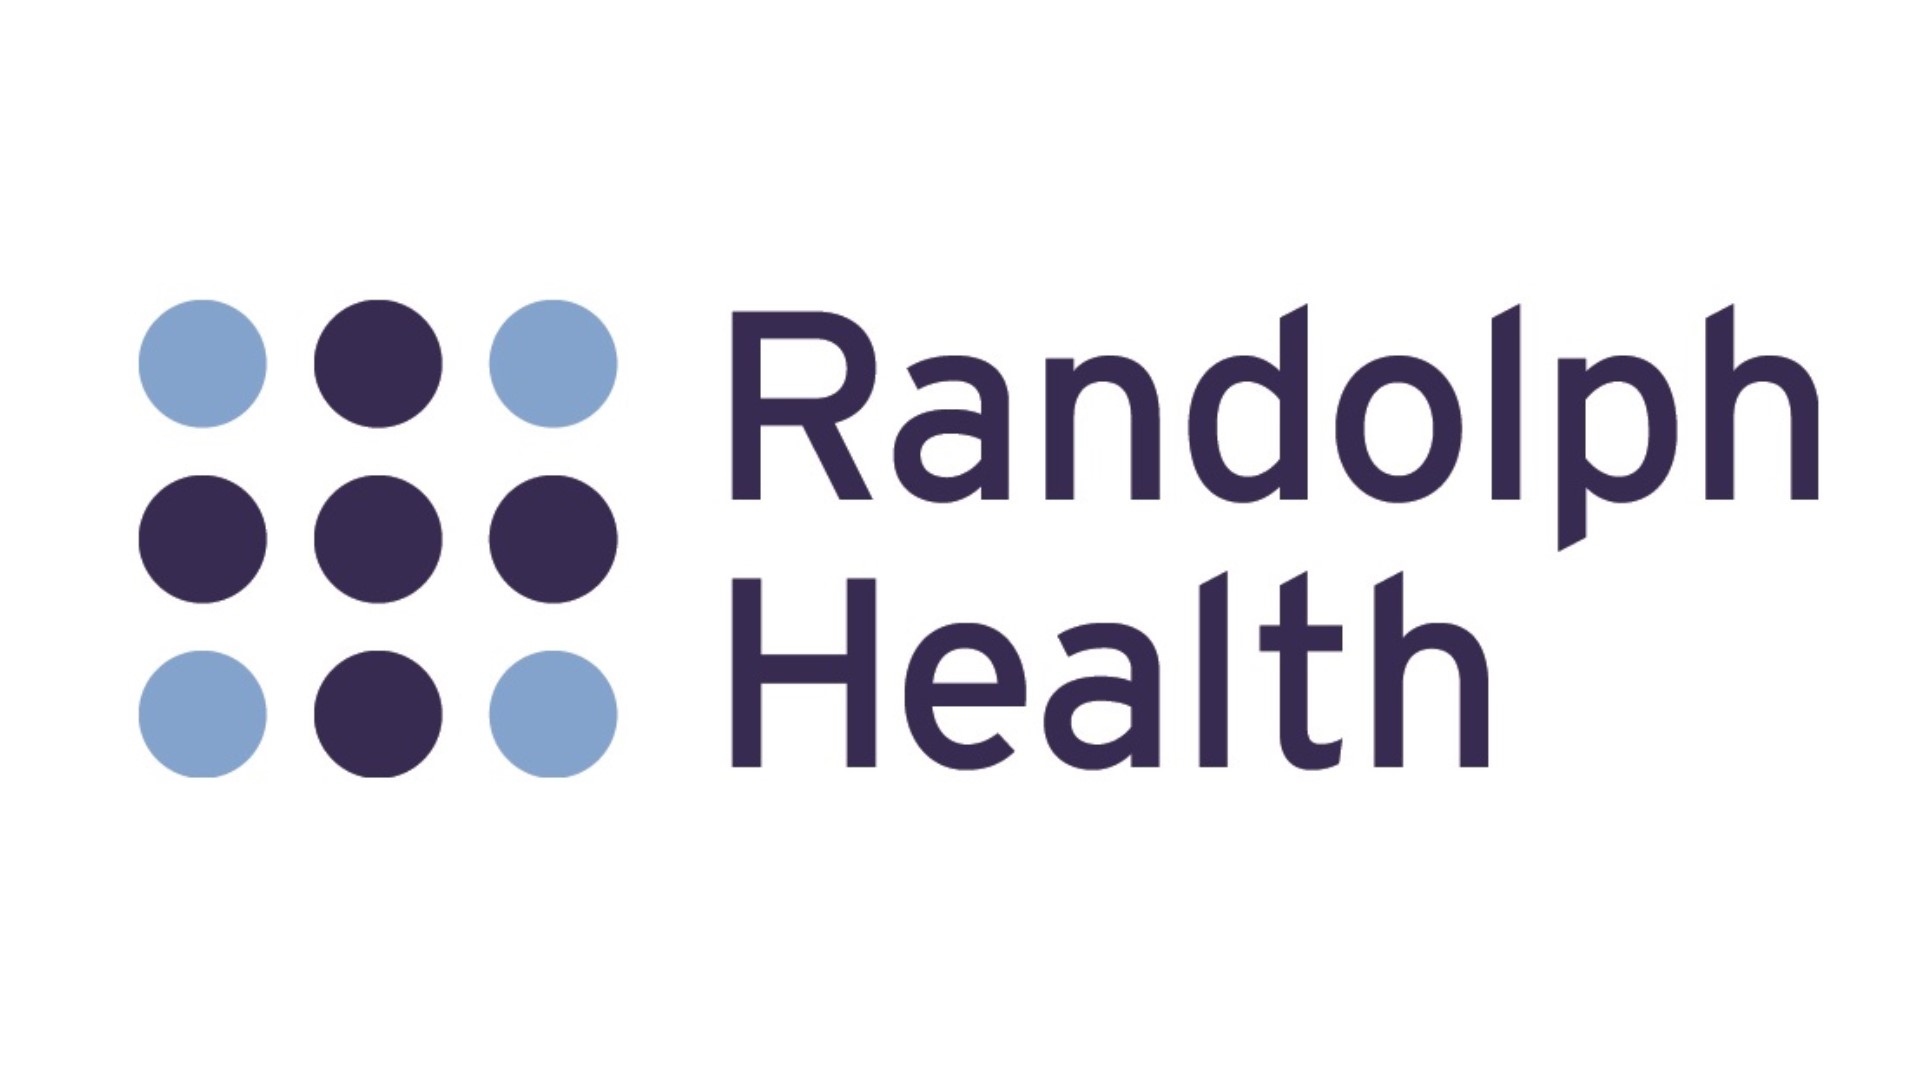 Randolph Health officials say they've been drowning in debt for three years.